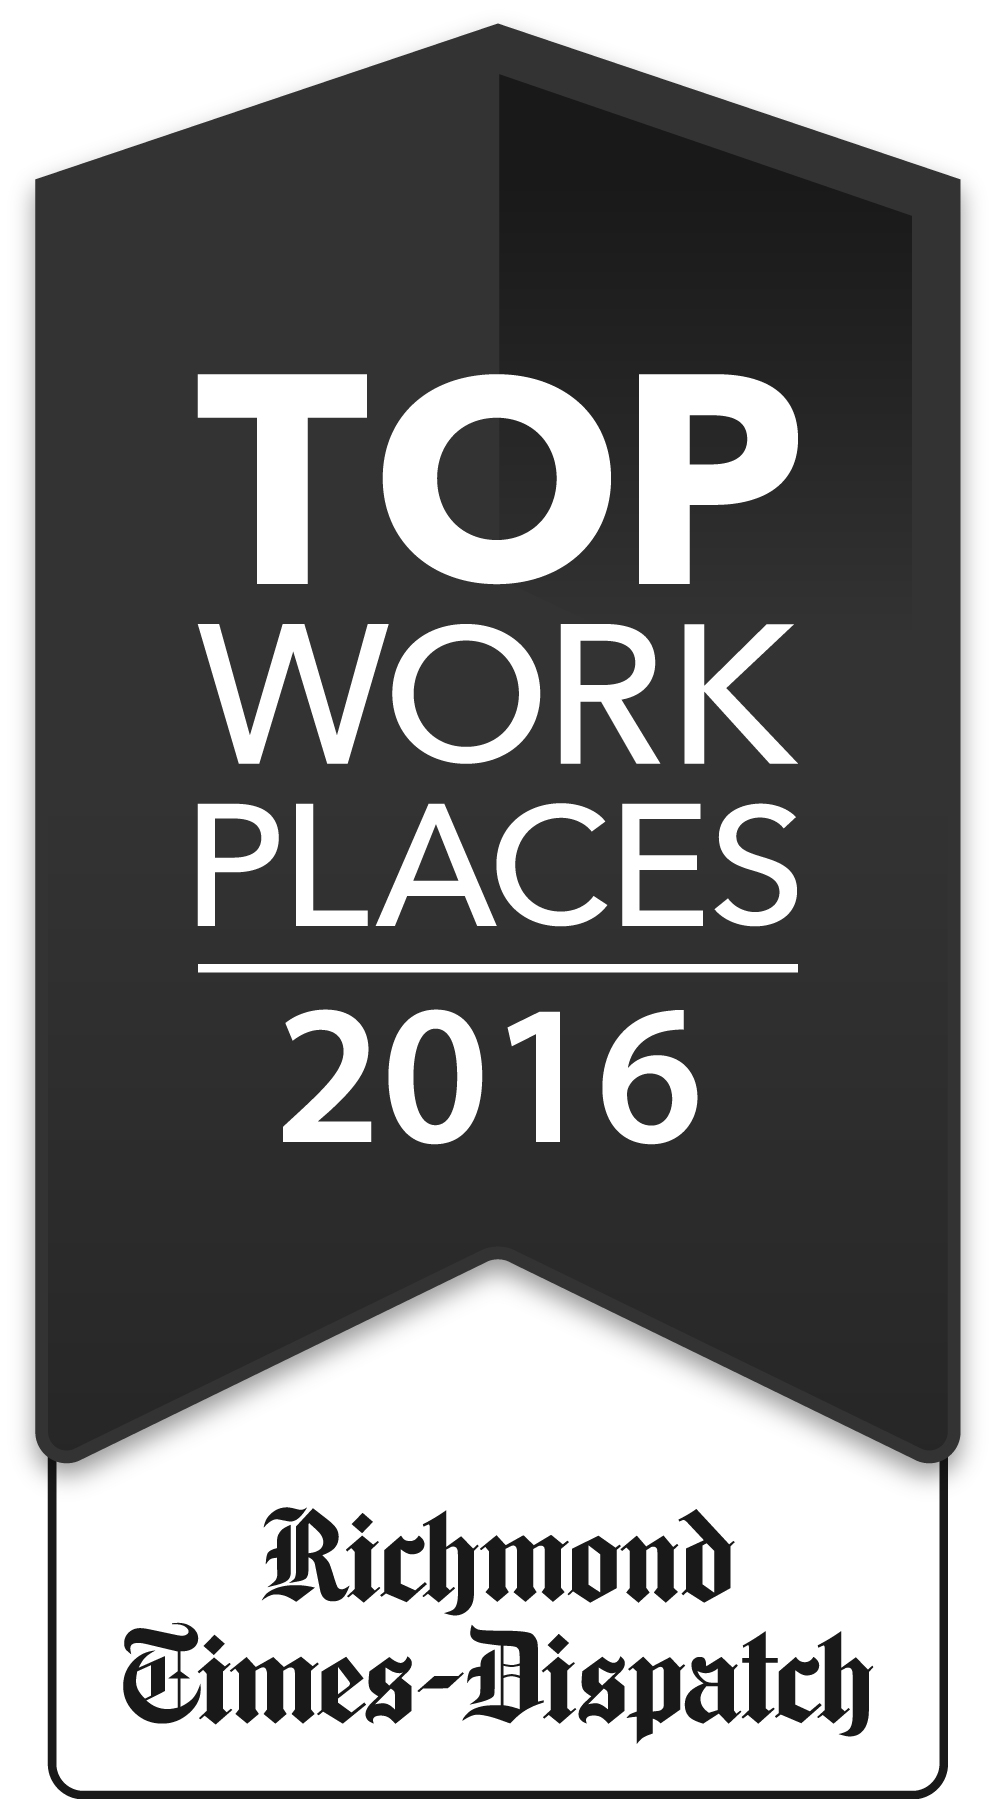 Top Work Places 2016 | Richmond Times-Dispatch | Virginia Oral Surgeons | Commonwealth Oral & Facial Surgery